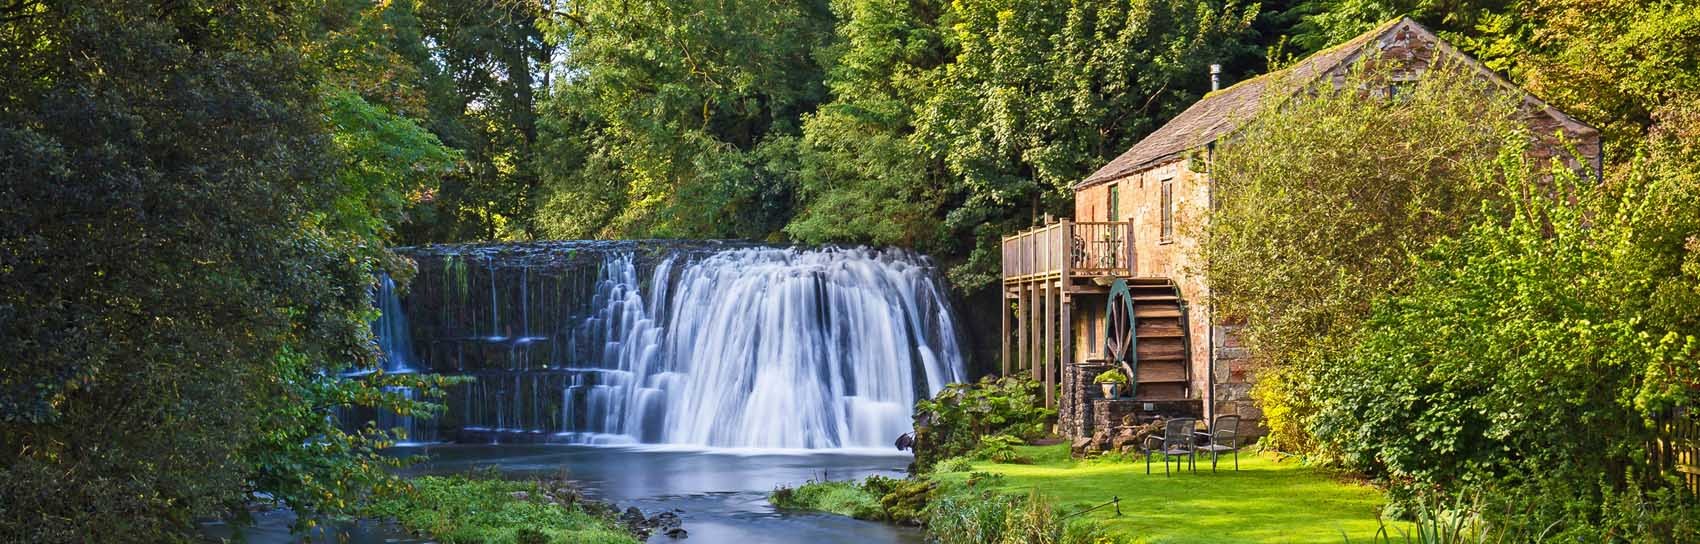 A waterfall and mill near Appleby in the Lake District. Photograph by DAVE ZDANOWICZ